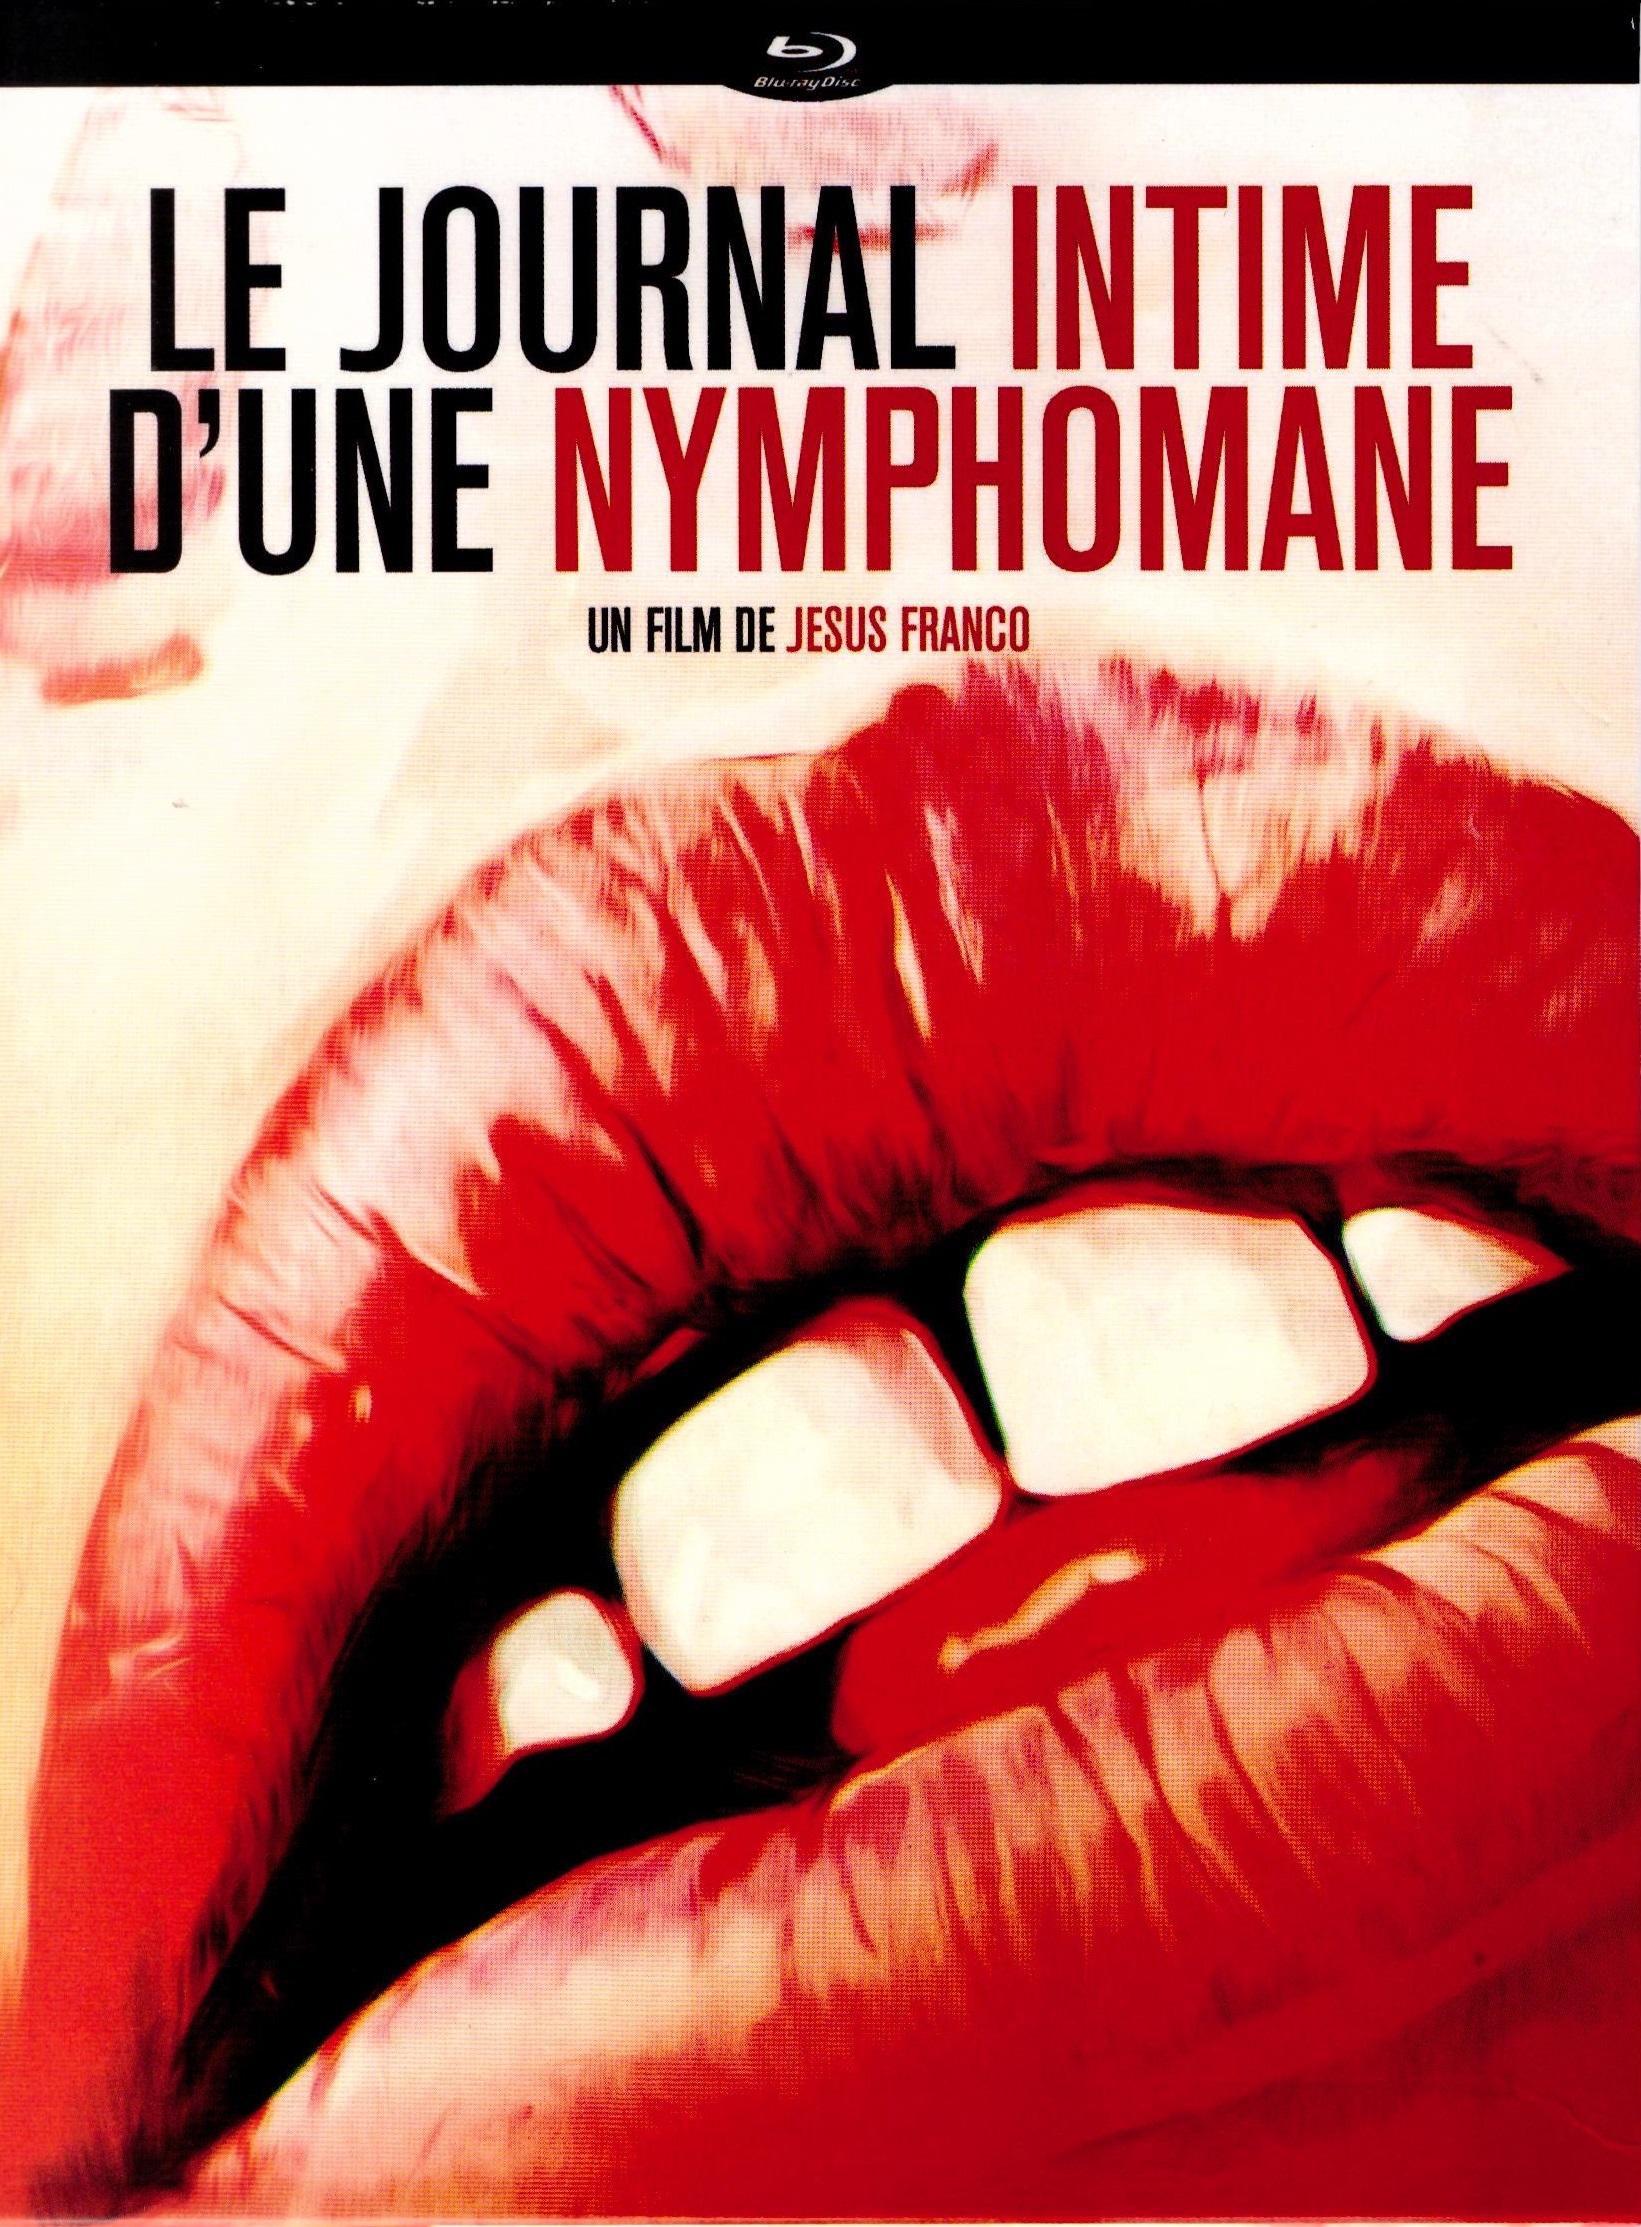 Le journal intime d'une nymphomane Blu-ray Release Date July 31 ...